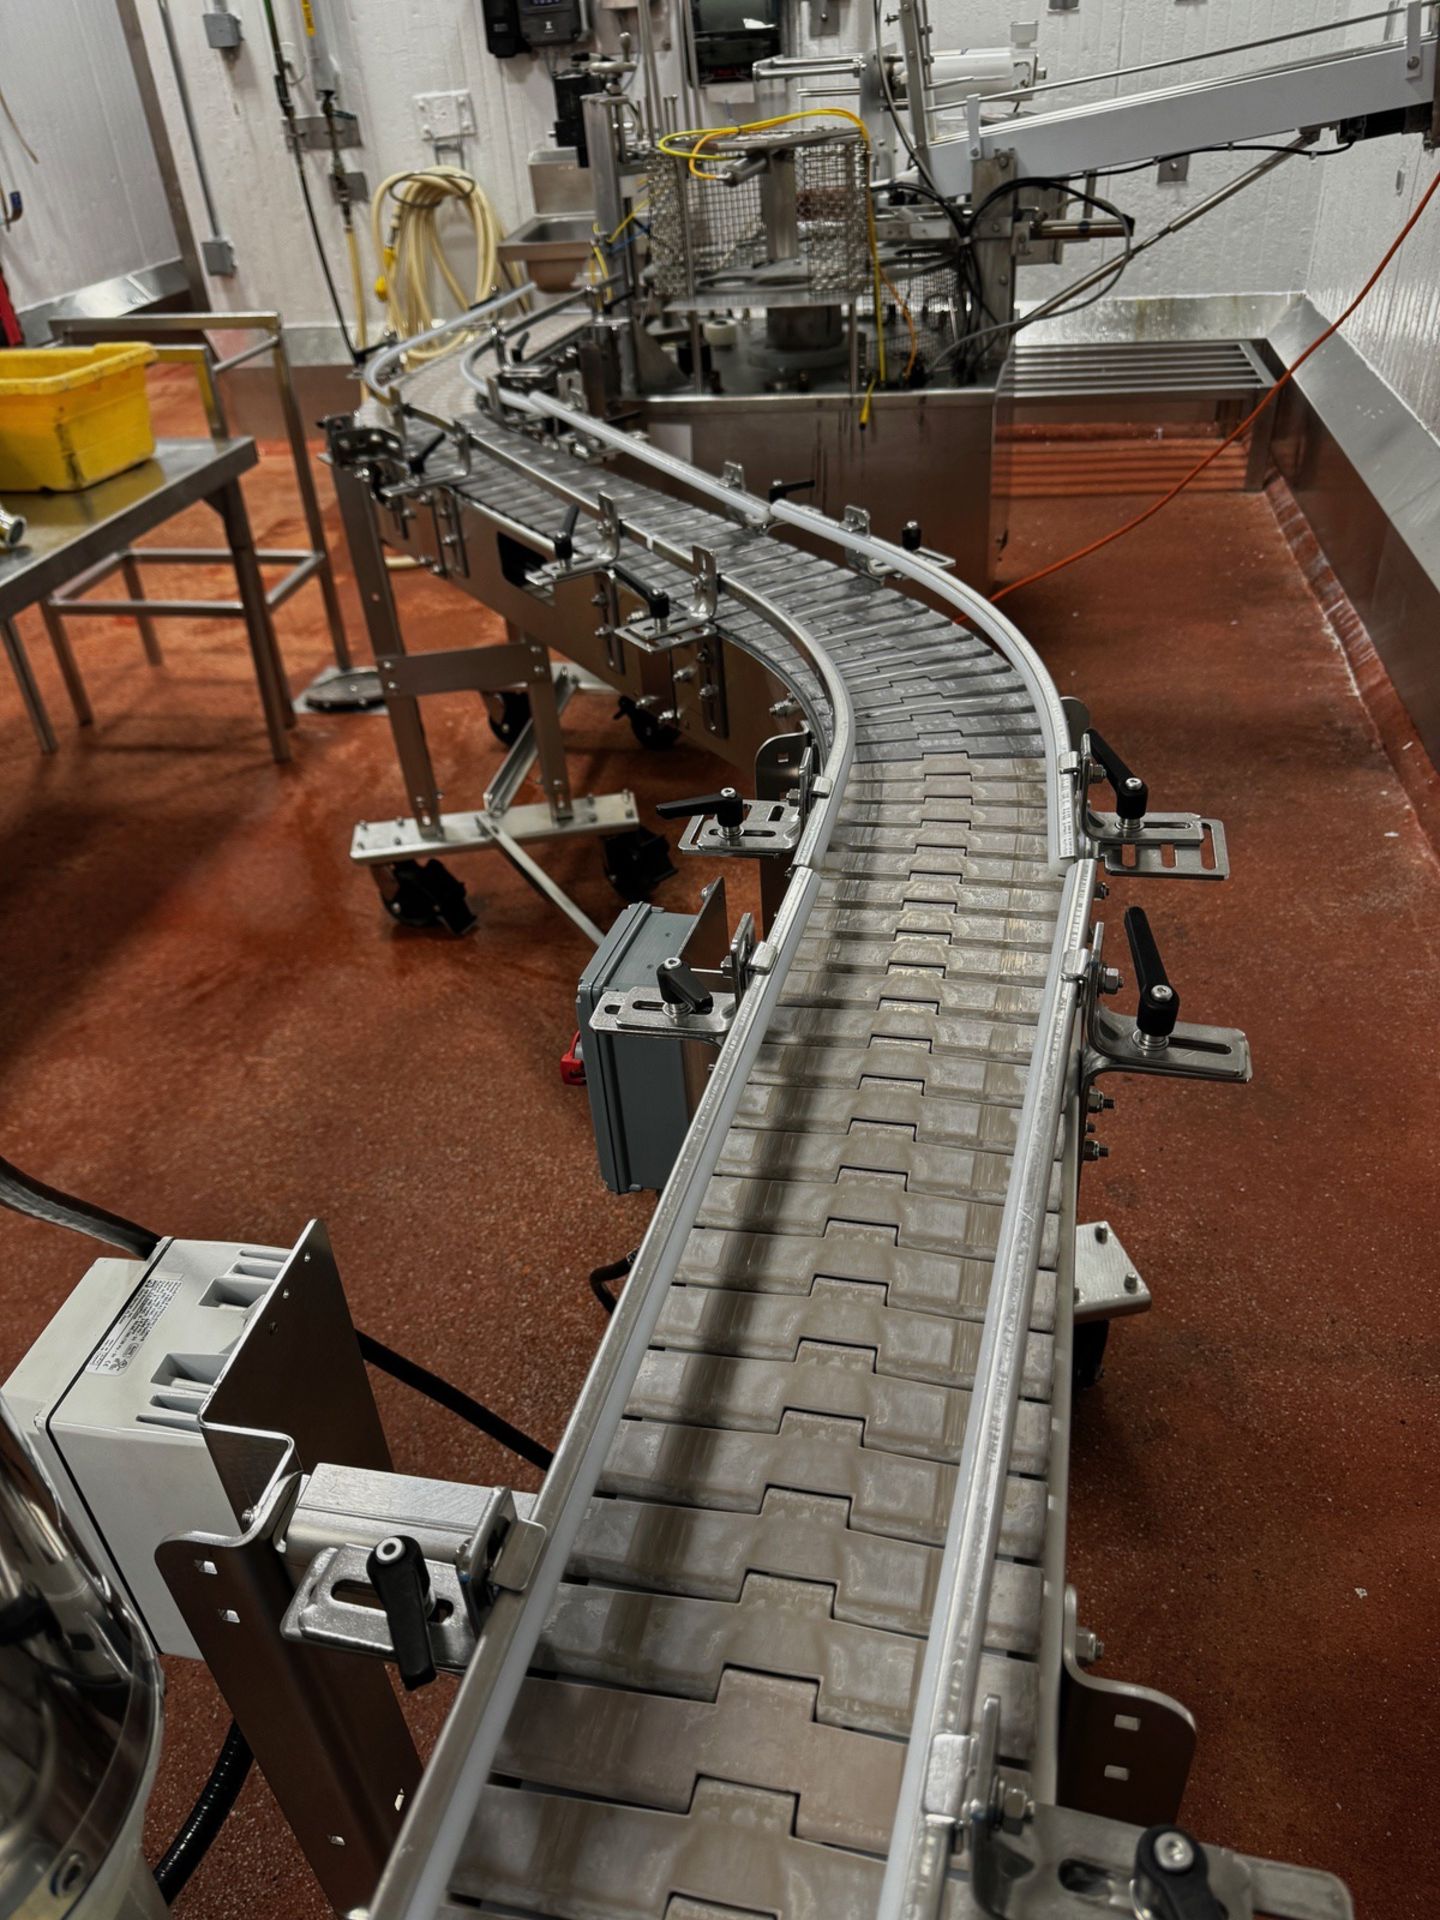 Nercon Stainless Steel Frame 8" Wide x 120" OA S-Curve Conveyor Belt w - Subj to Bulk | Rig Fee $175 - Image 3 of 6